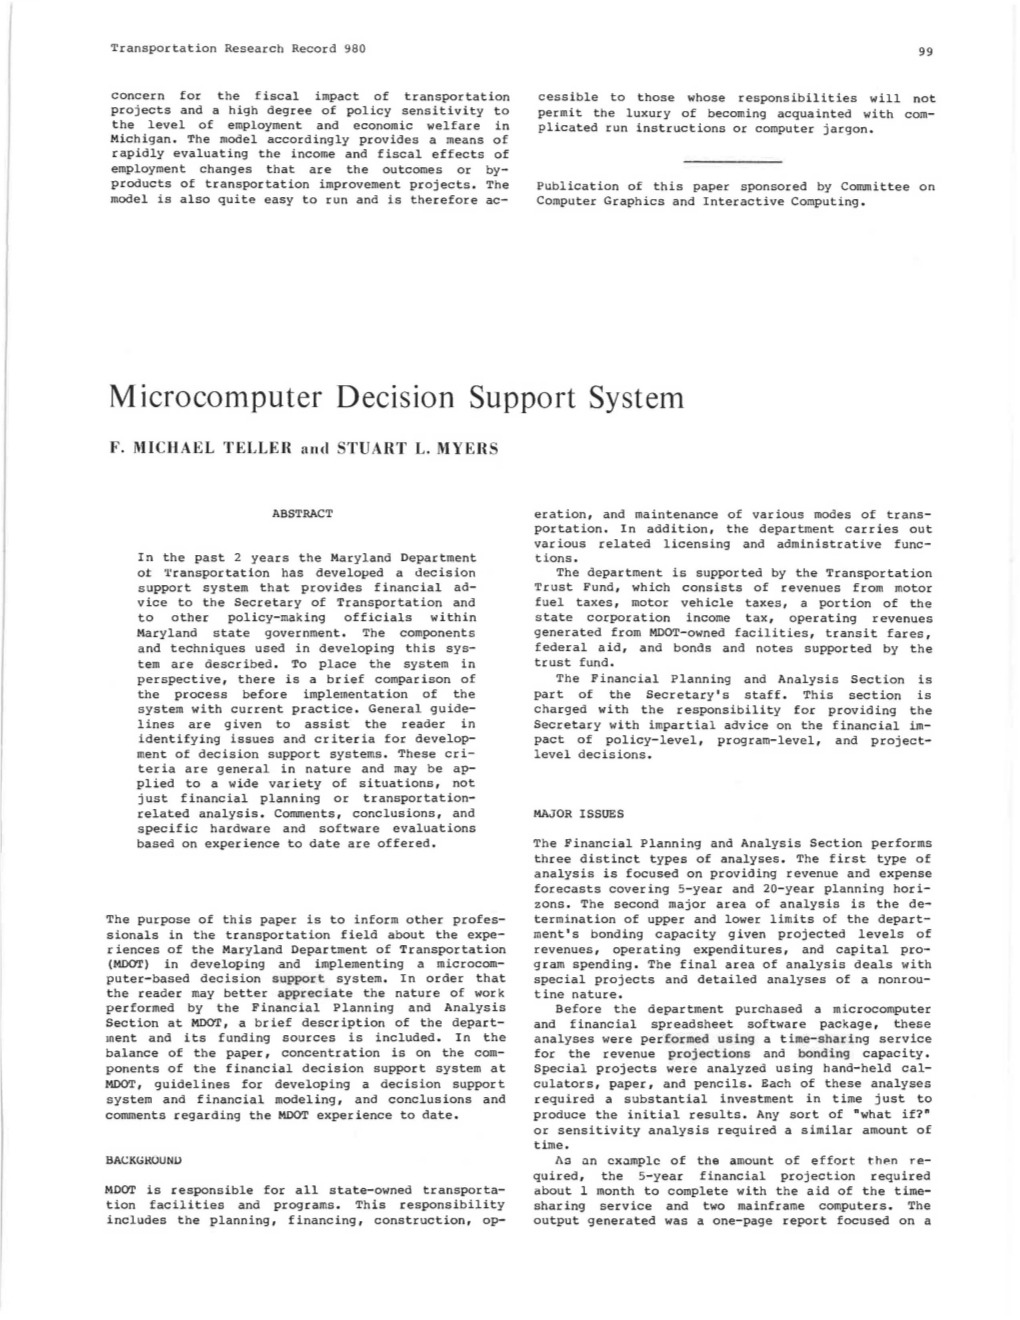 Microcomputer Decision Support System